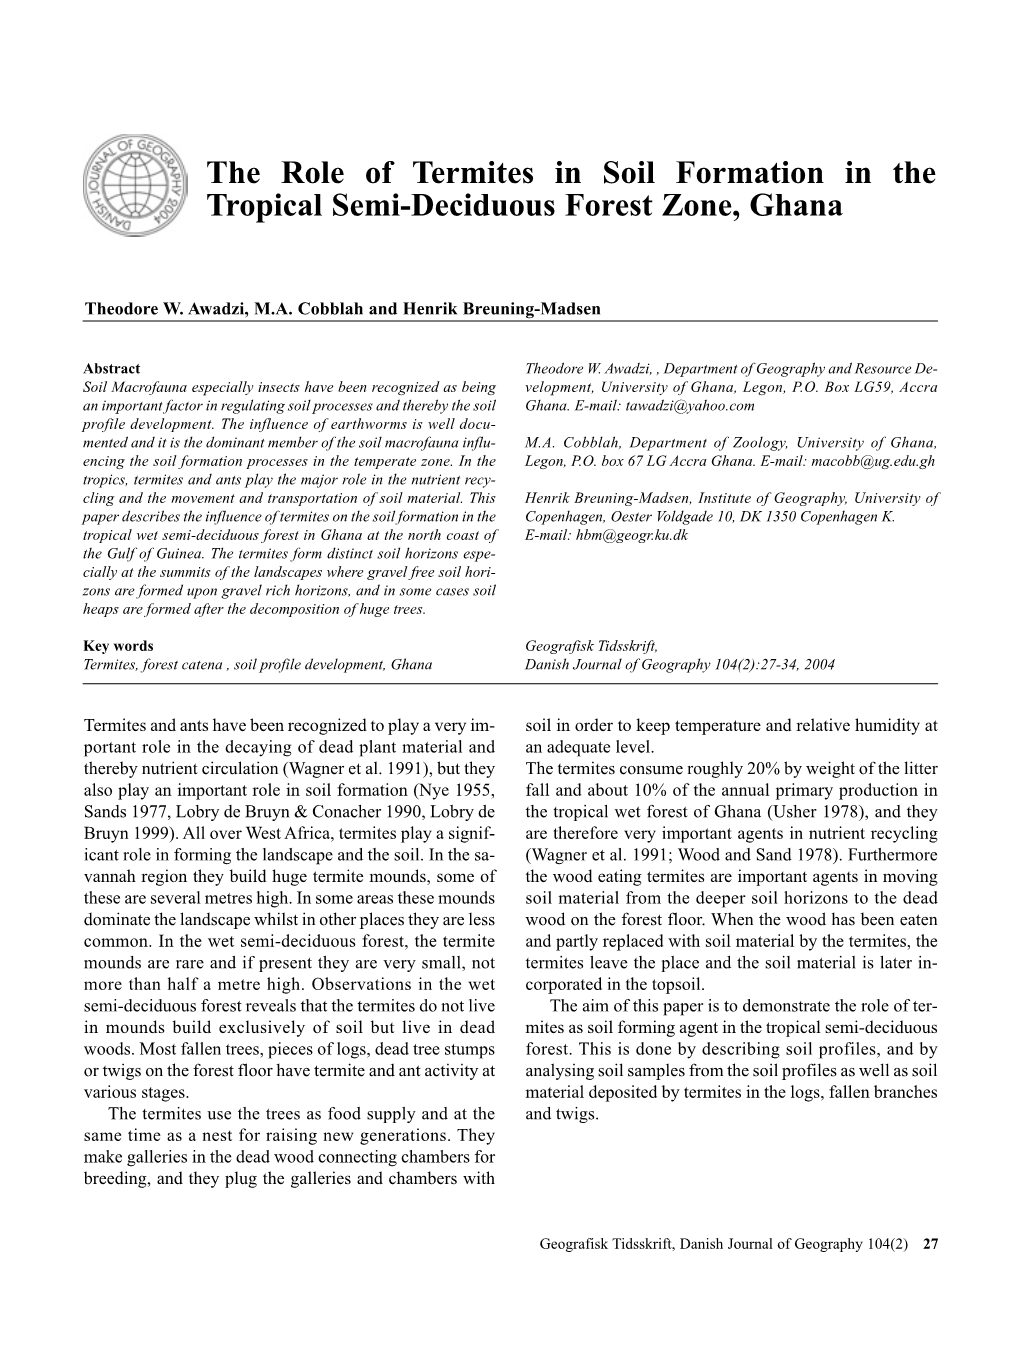 The Role of Termites in Soil Formation in the Tropical Semi-Deciduous Forest Zone, Ghana